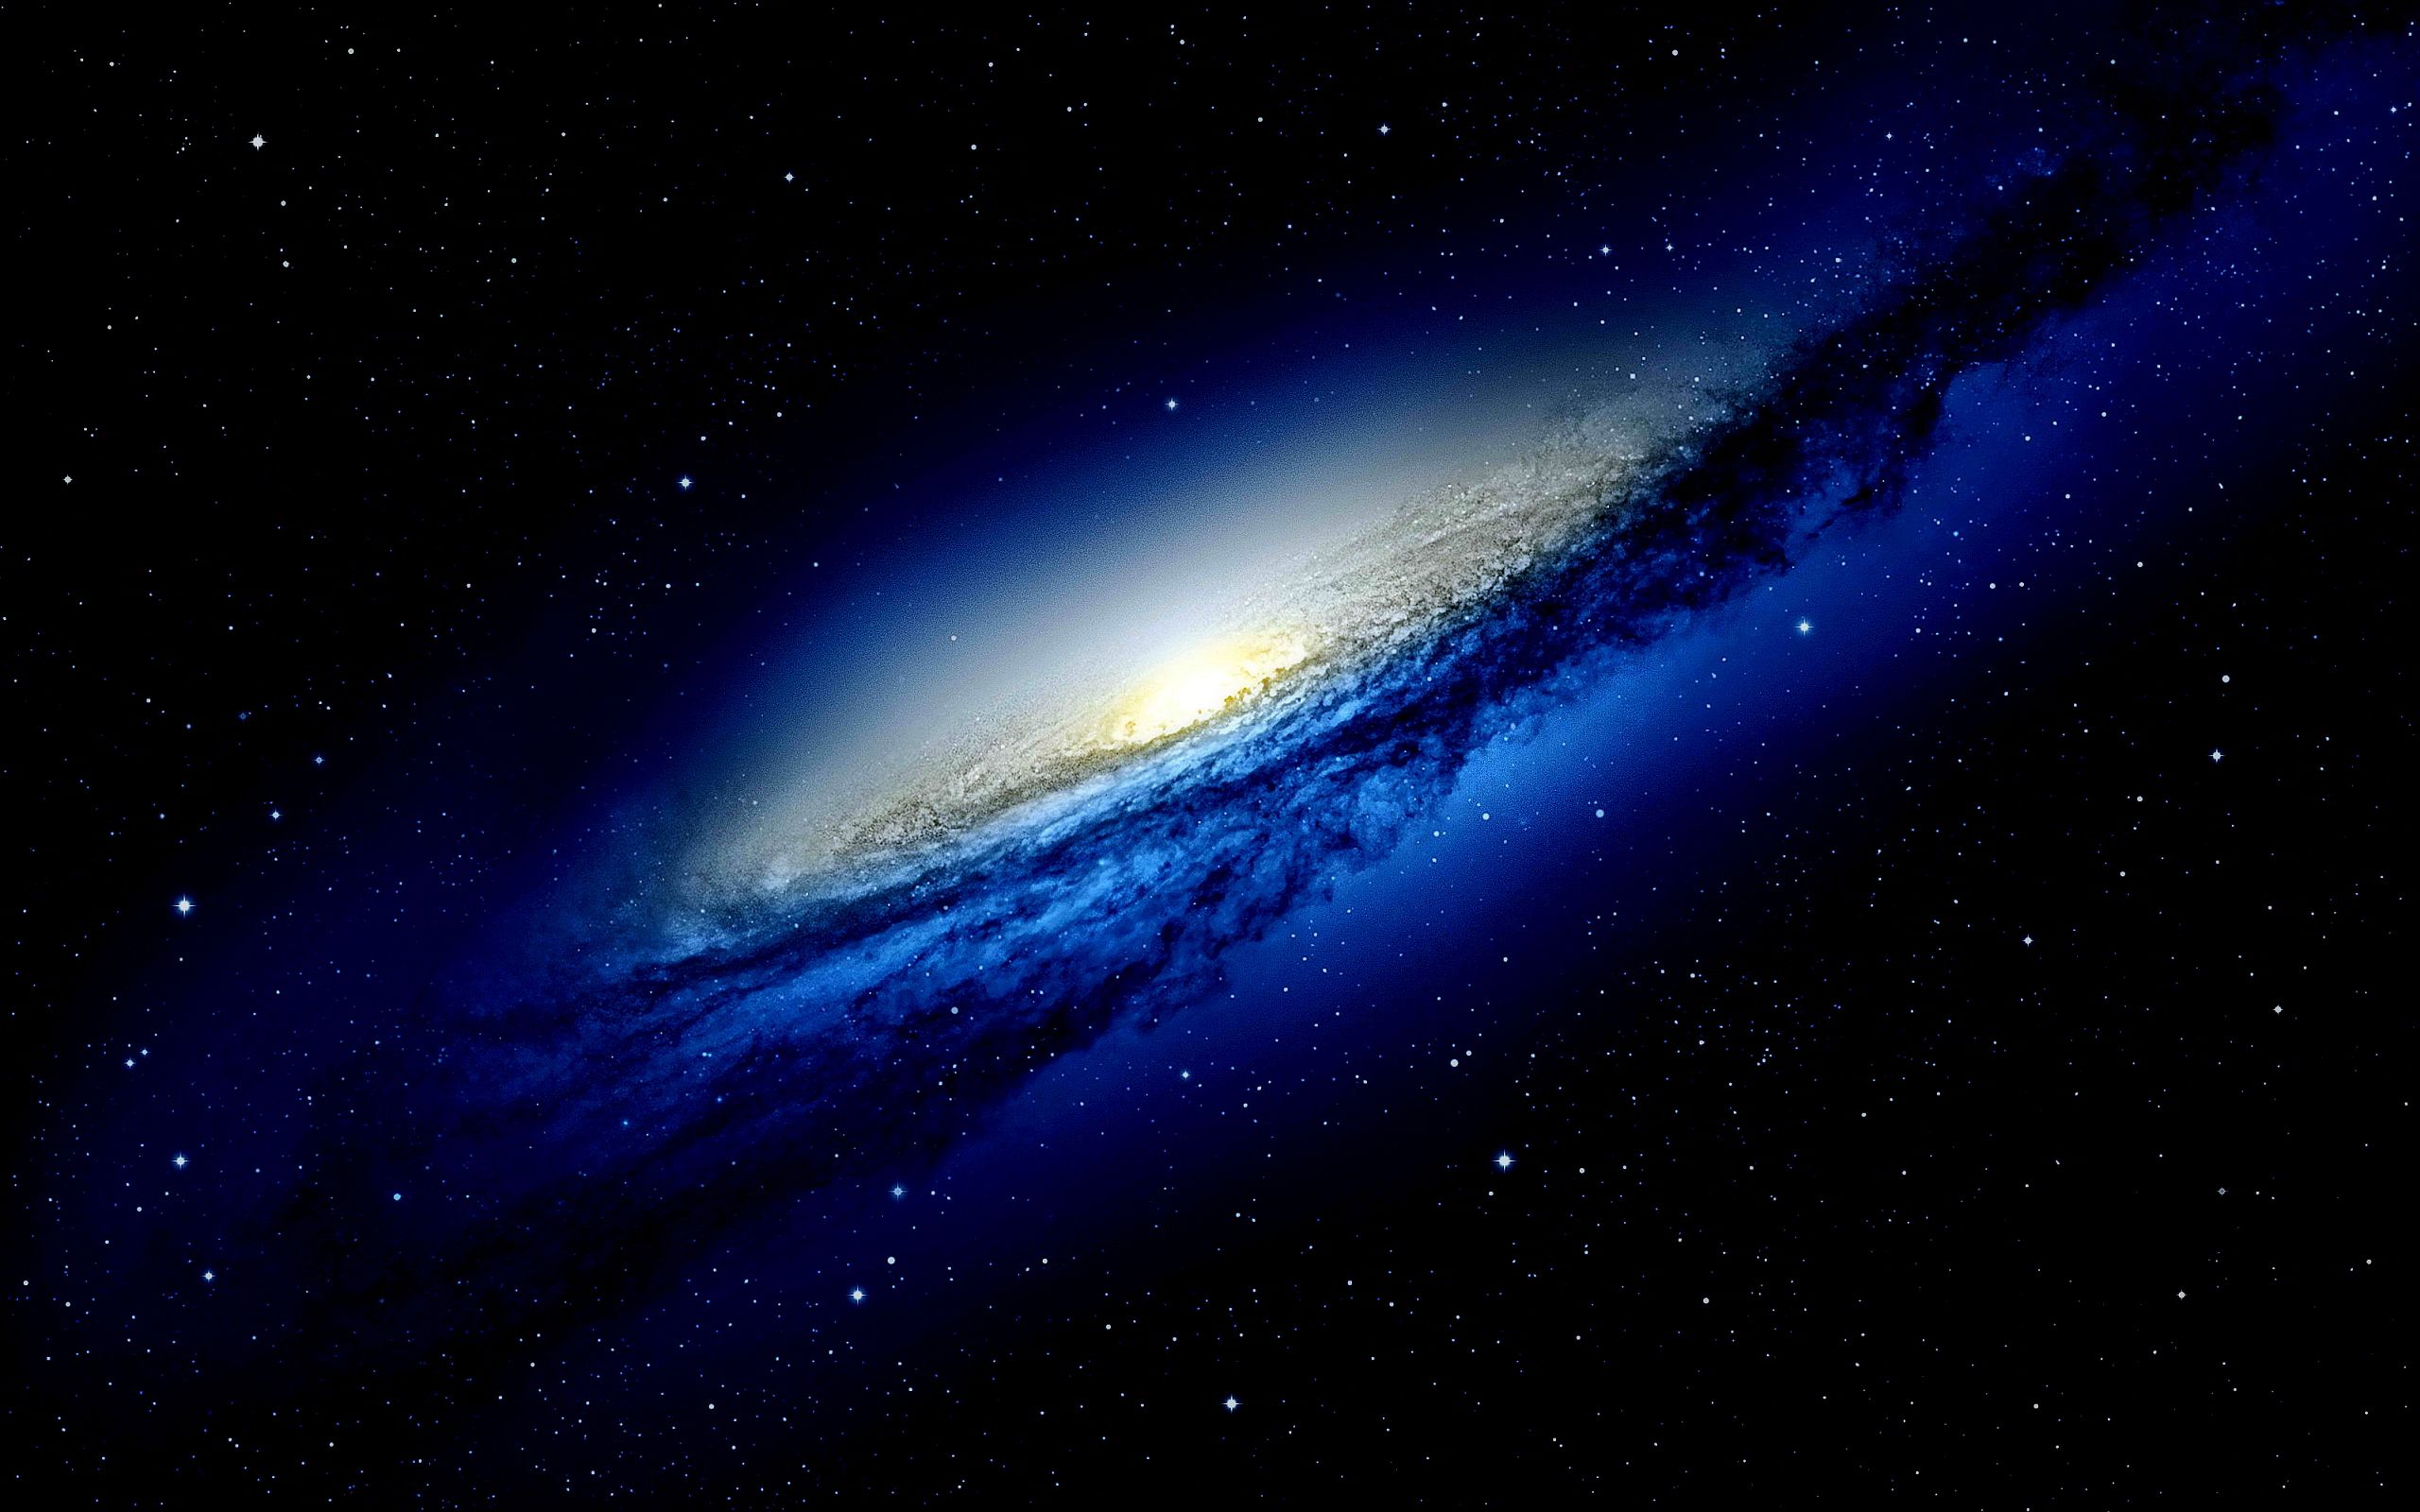 Security Check Required. Blue galaxy wallpaper, HD galaxy wallpaper, Galaxies